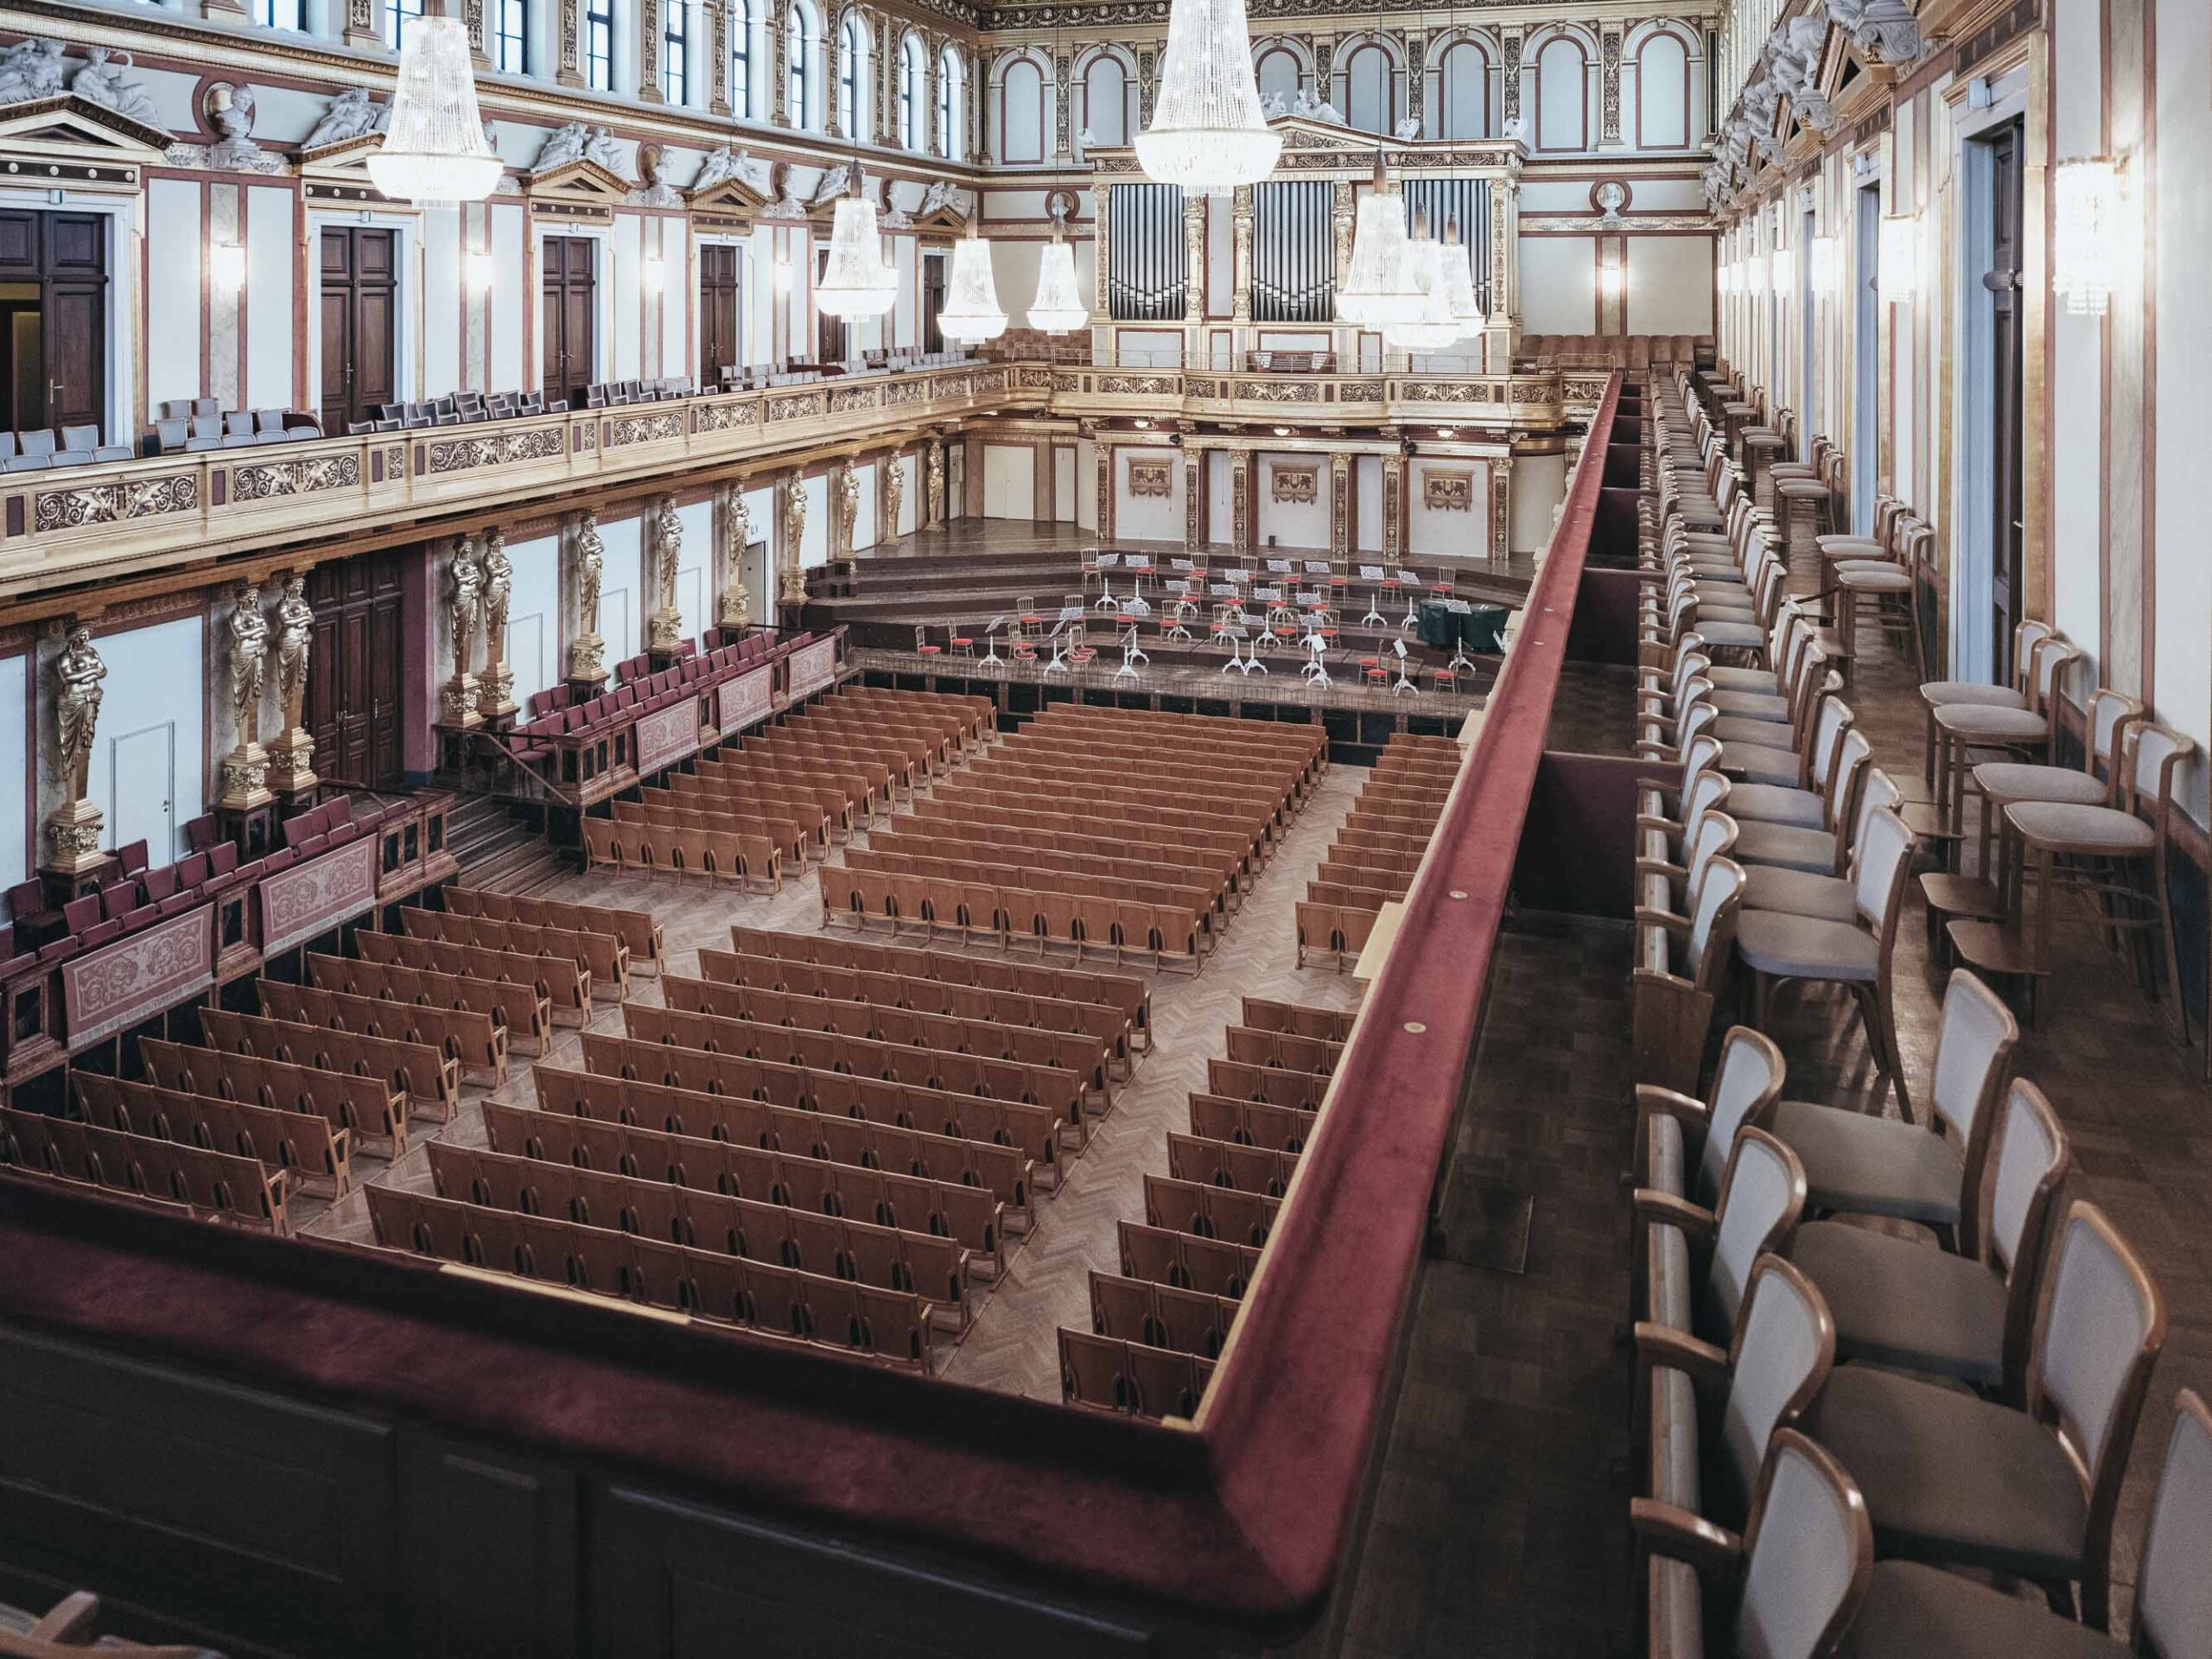 This picture shows a photo from a series of pictures taken at the Musikverein in Vienna.